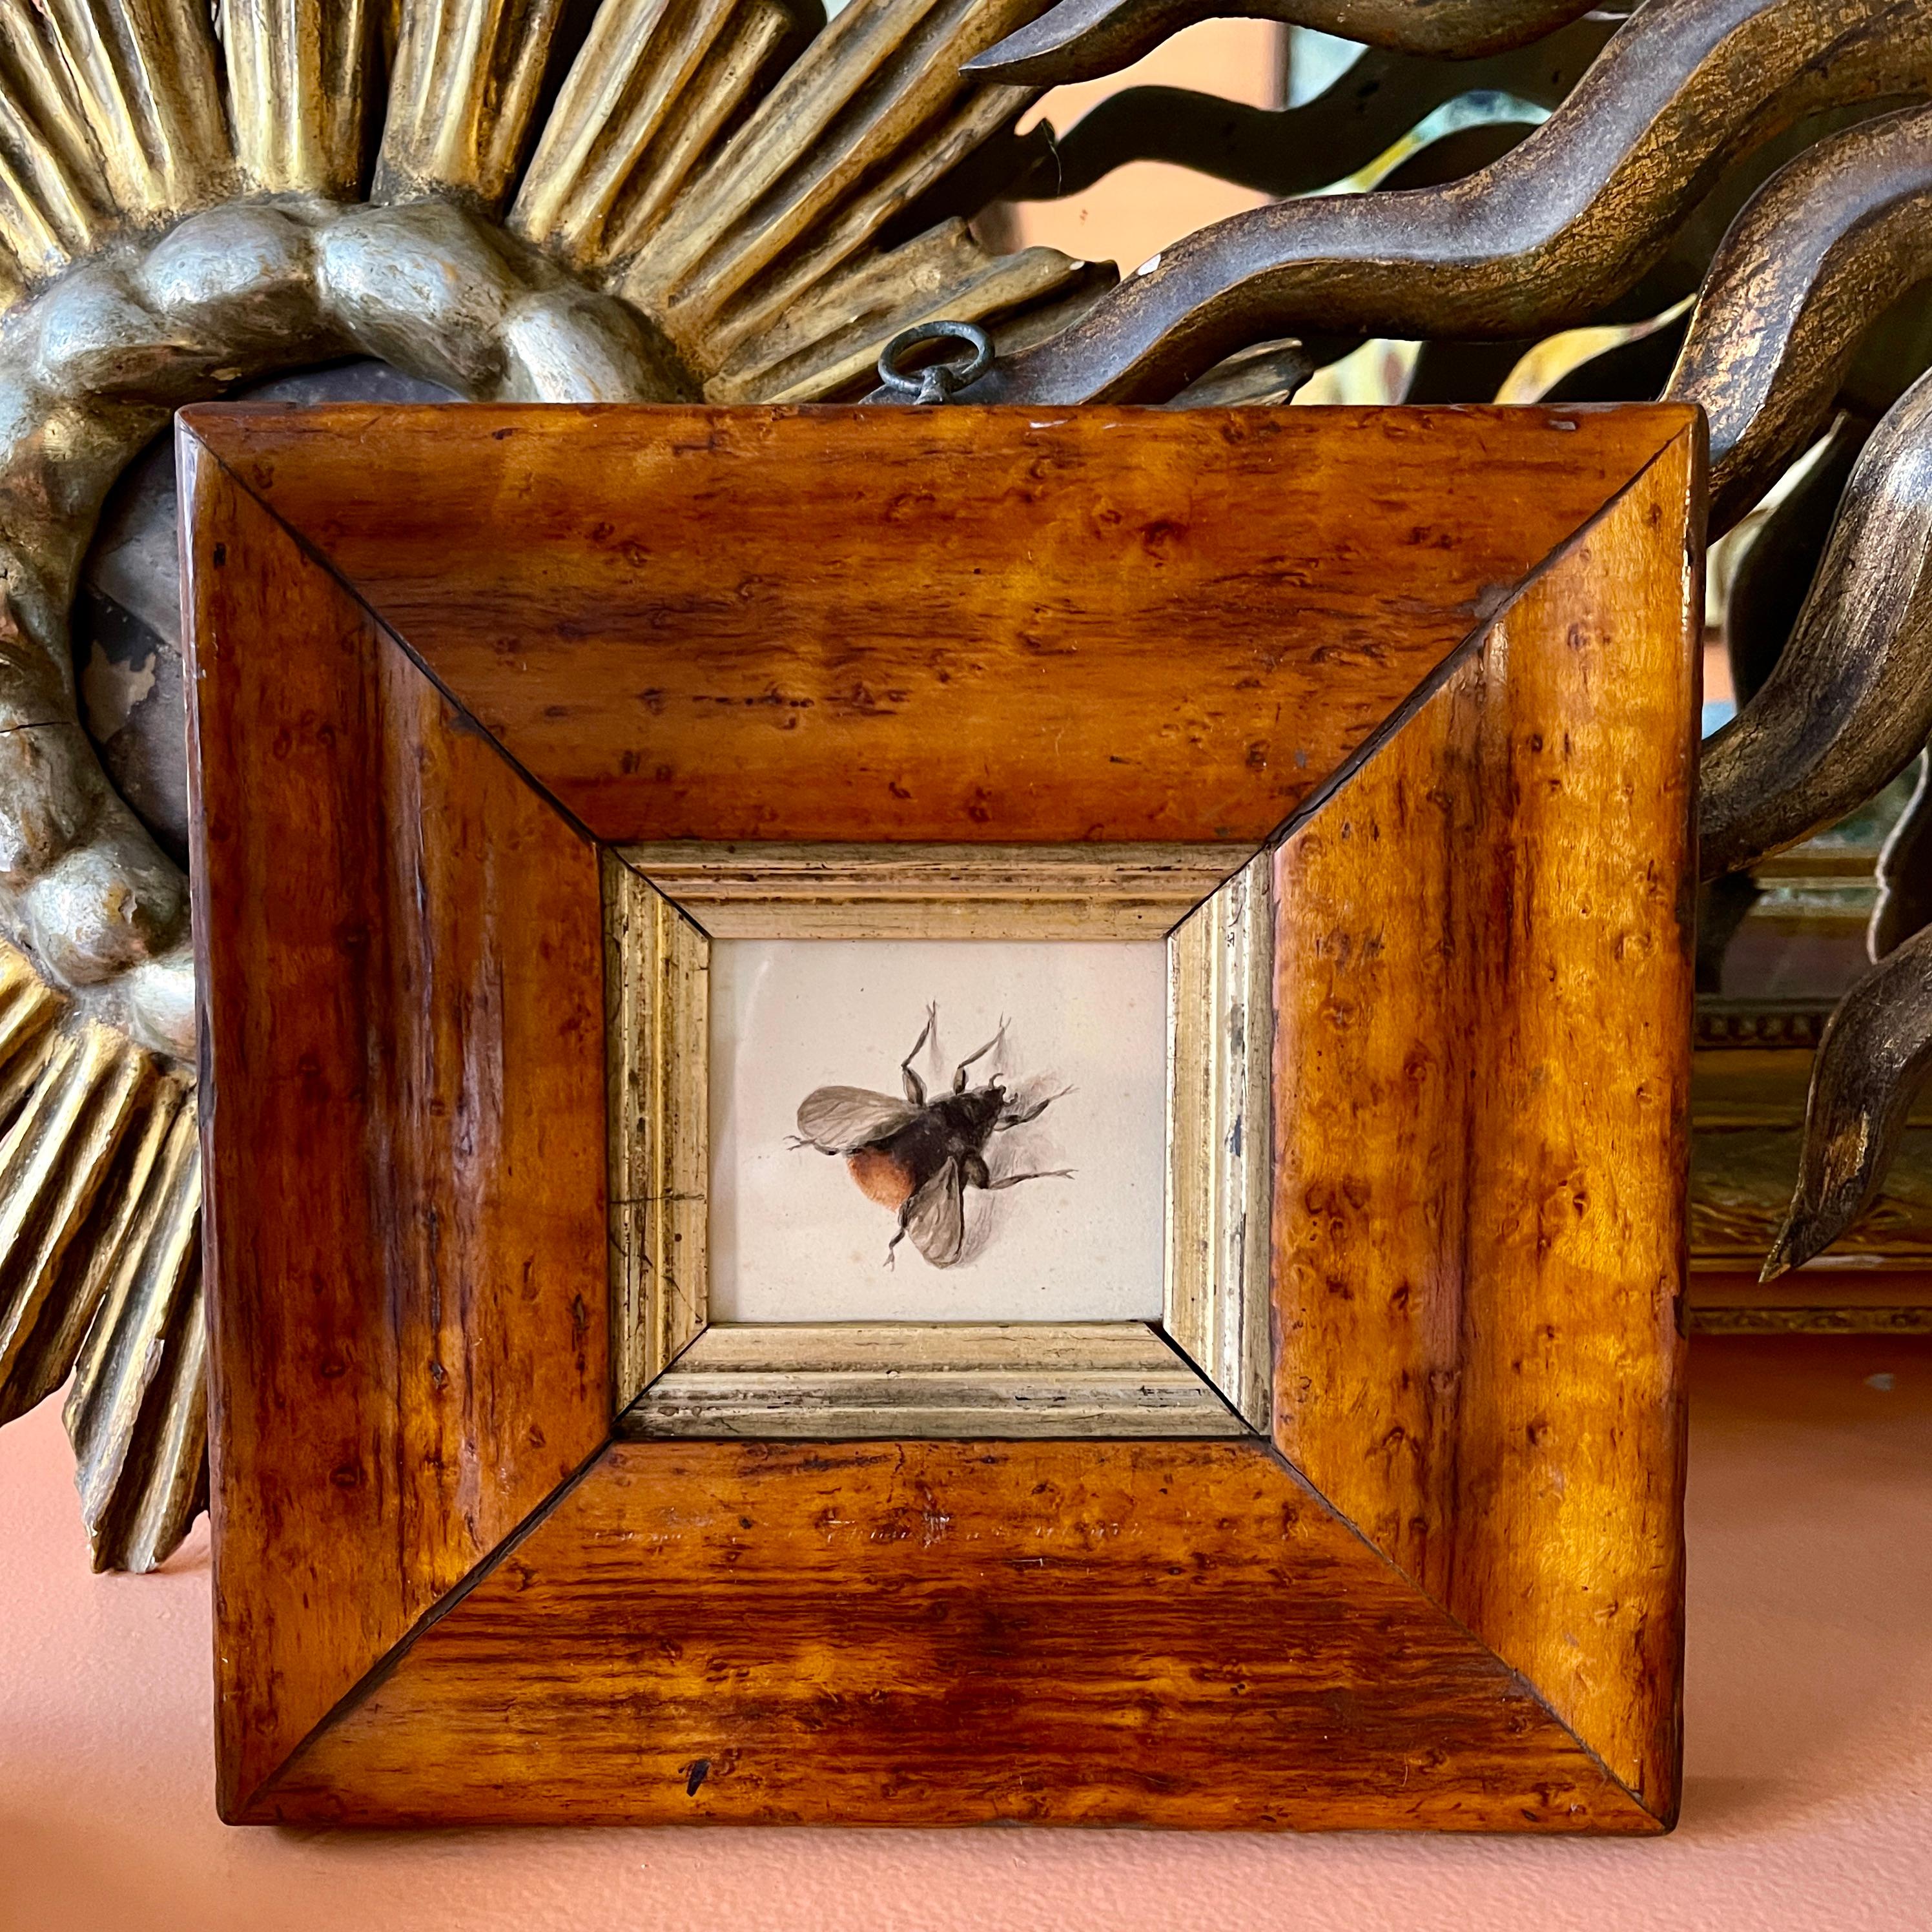 An original British School Regency Period watercolor study of a bumble bee, mounted in a Georgian Period fruitwood frame – circa 1825-1835.

These watercolors were largely painted by young girls from aristocratic families during the Jane Austen